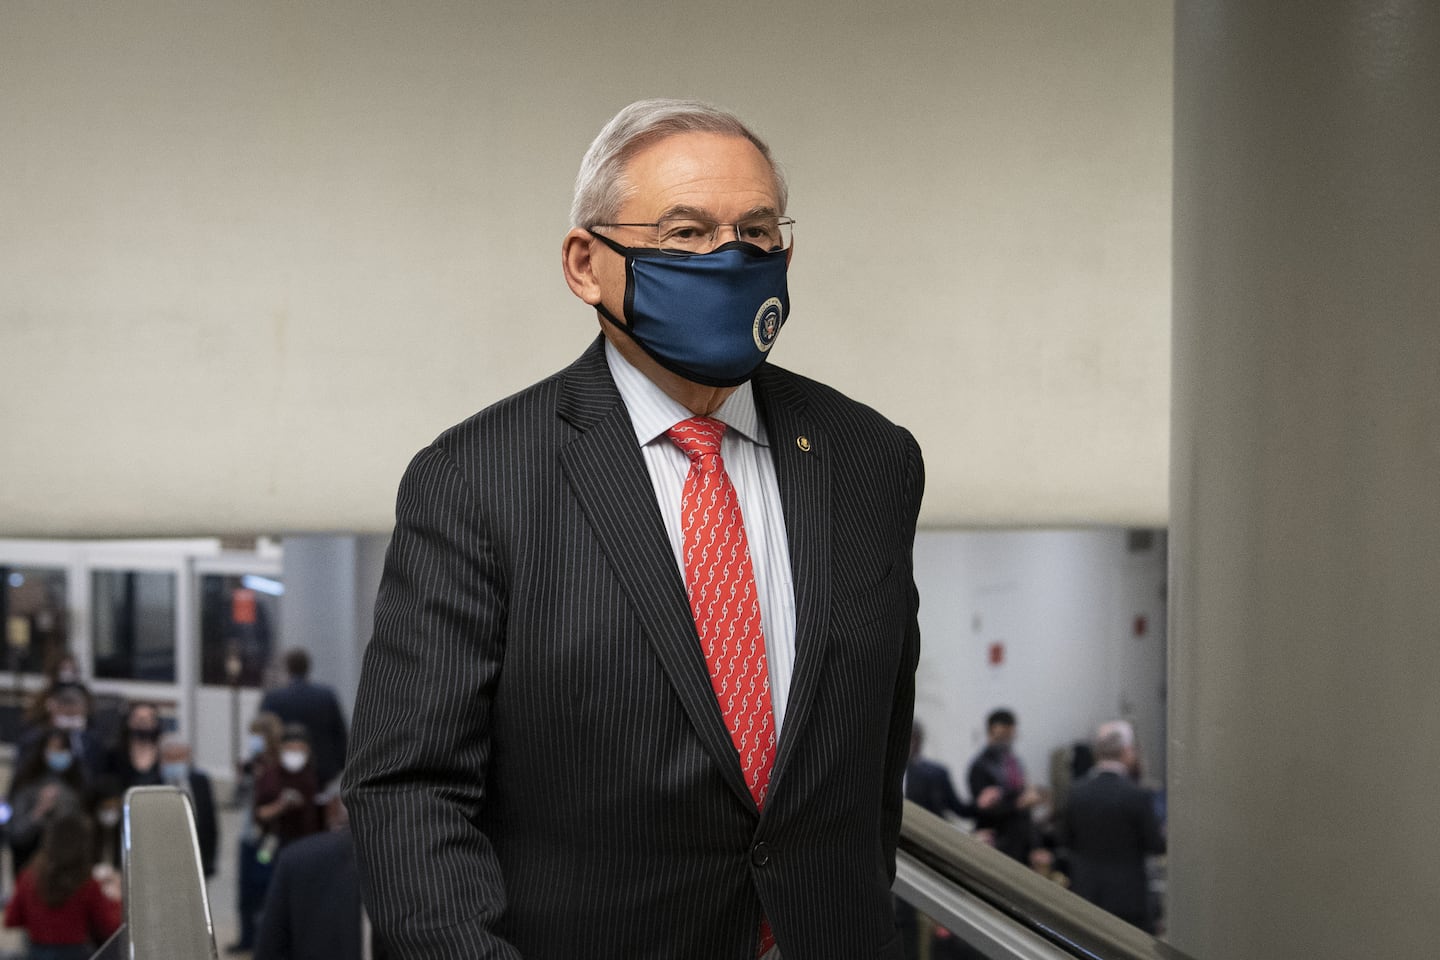 Senator Bob Menendez, a Democrat from New Jersey, walks through the Senate subway at the U.S. Capitol in Washington, D.C., U.S., on Tuesday, Feb. 9, 2021. The Senate begins Donald Trump's second impeachment trial today with a fight over whether the proceeding is constitutional, as a number of conservative lawyers reject the defense teams claim that a former president can't be convicted of a crime by Congress. Photographer: Caroline Brehman/CQ Roll Call/Bloomberg via Getty Images